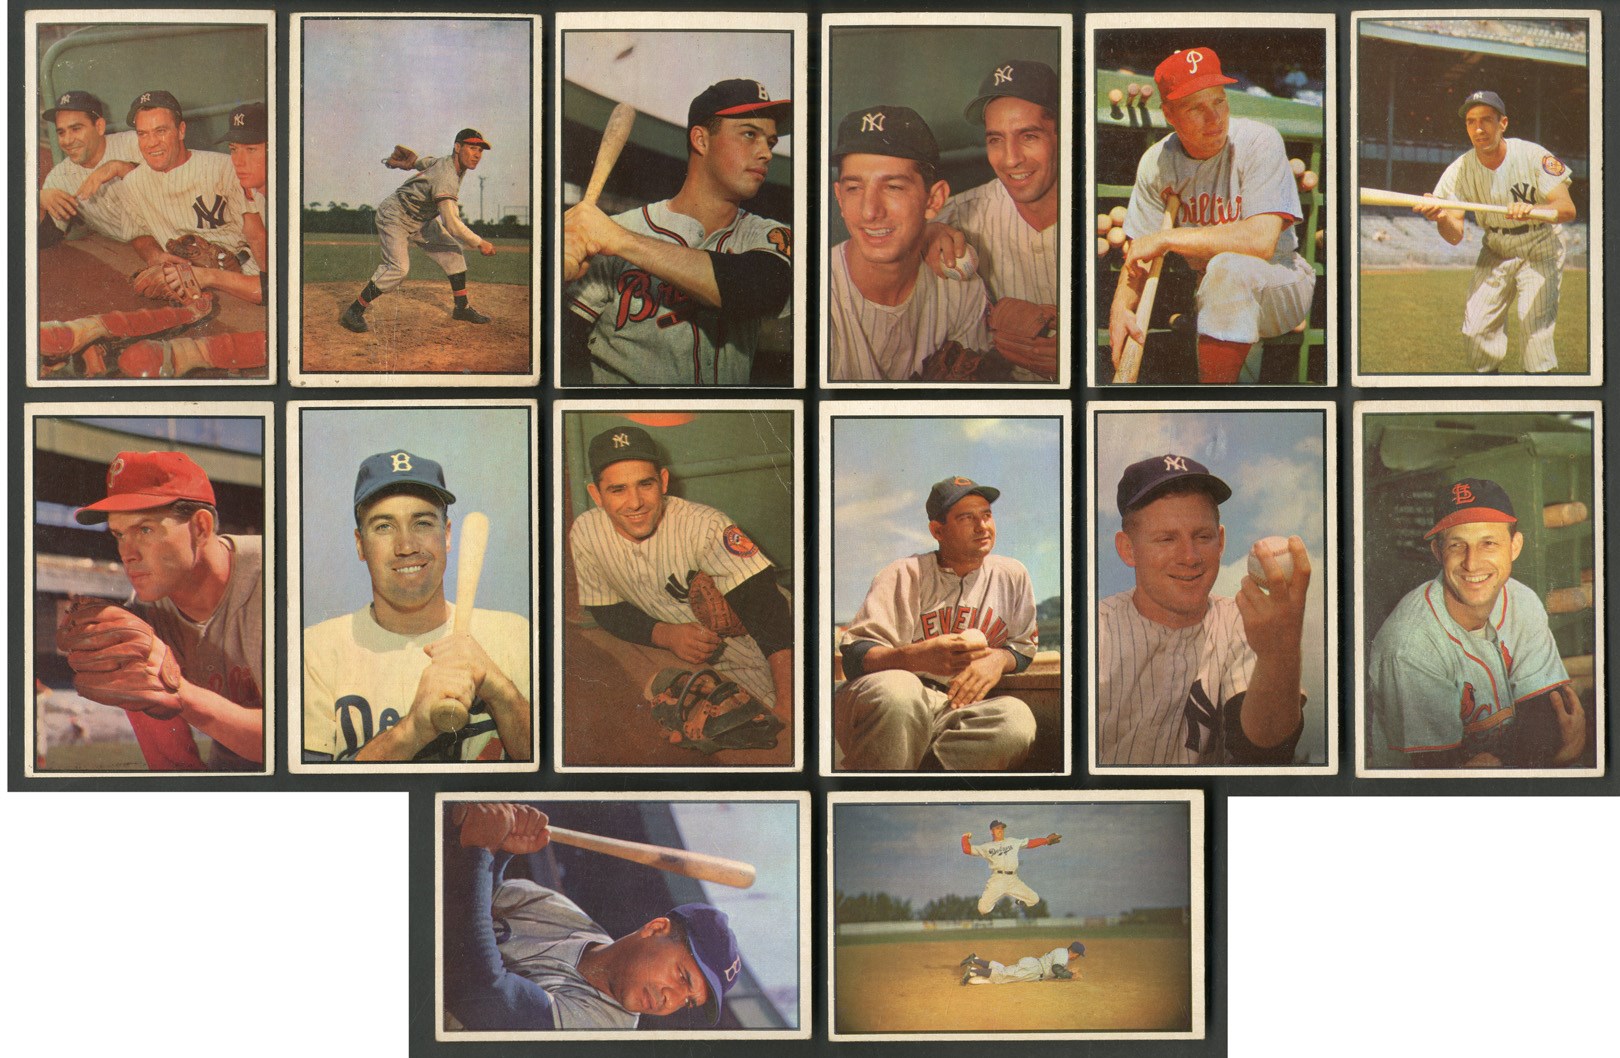 1953 Bowman Color Collection (14 HOFers with Bauer/Berra/Mantle) - LOADED!